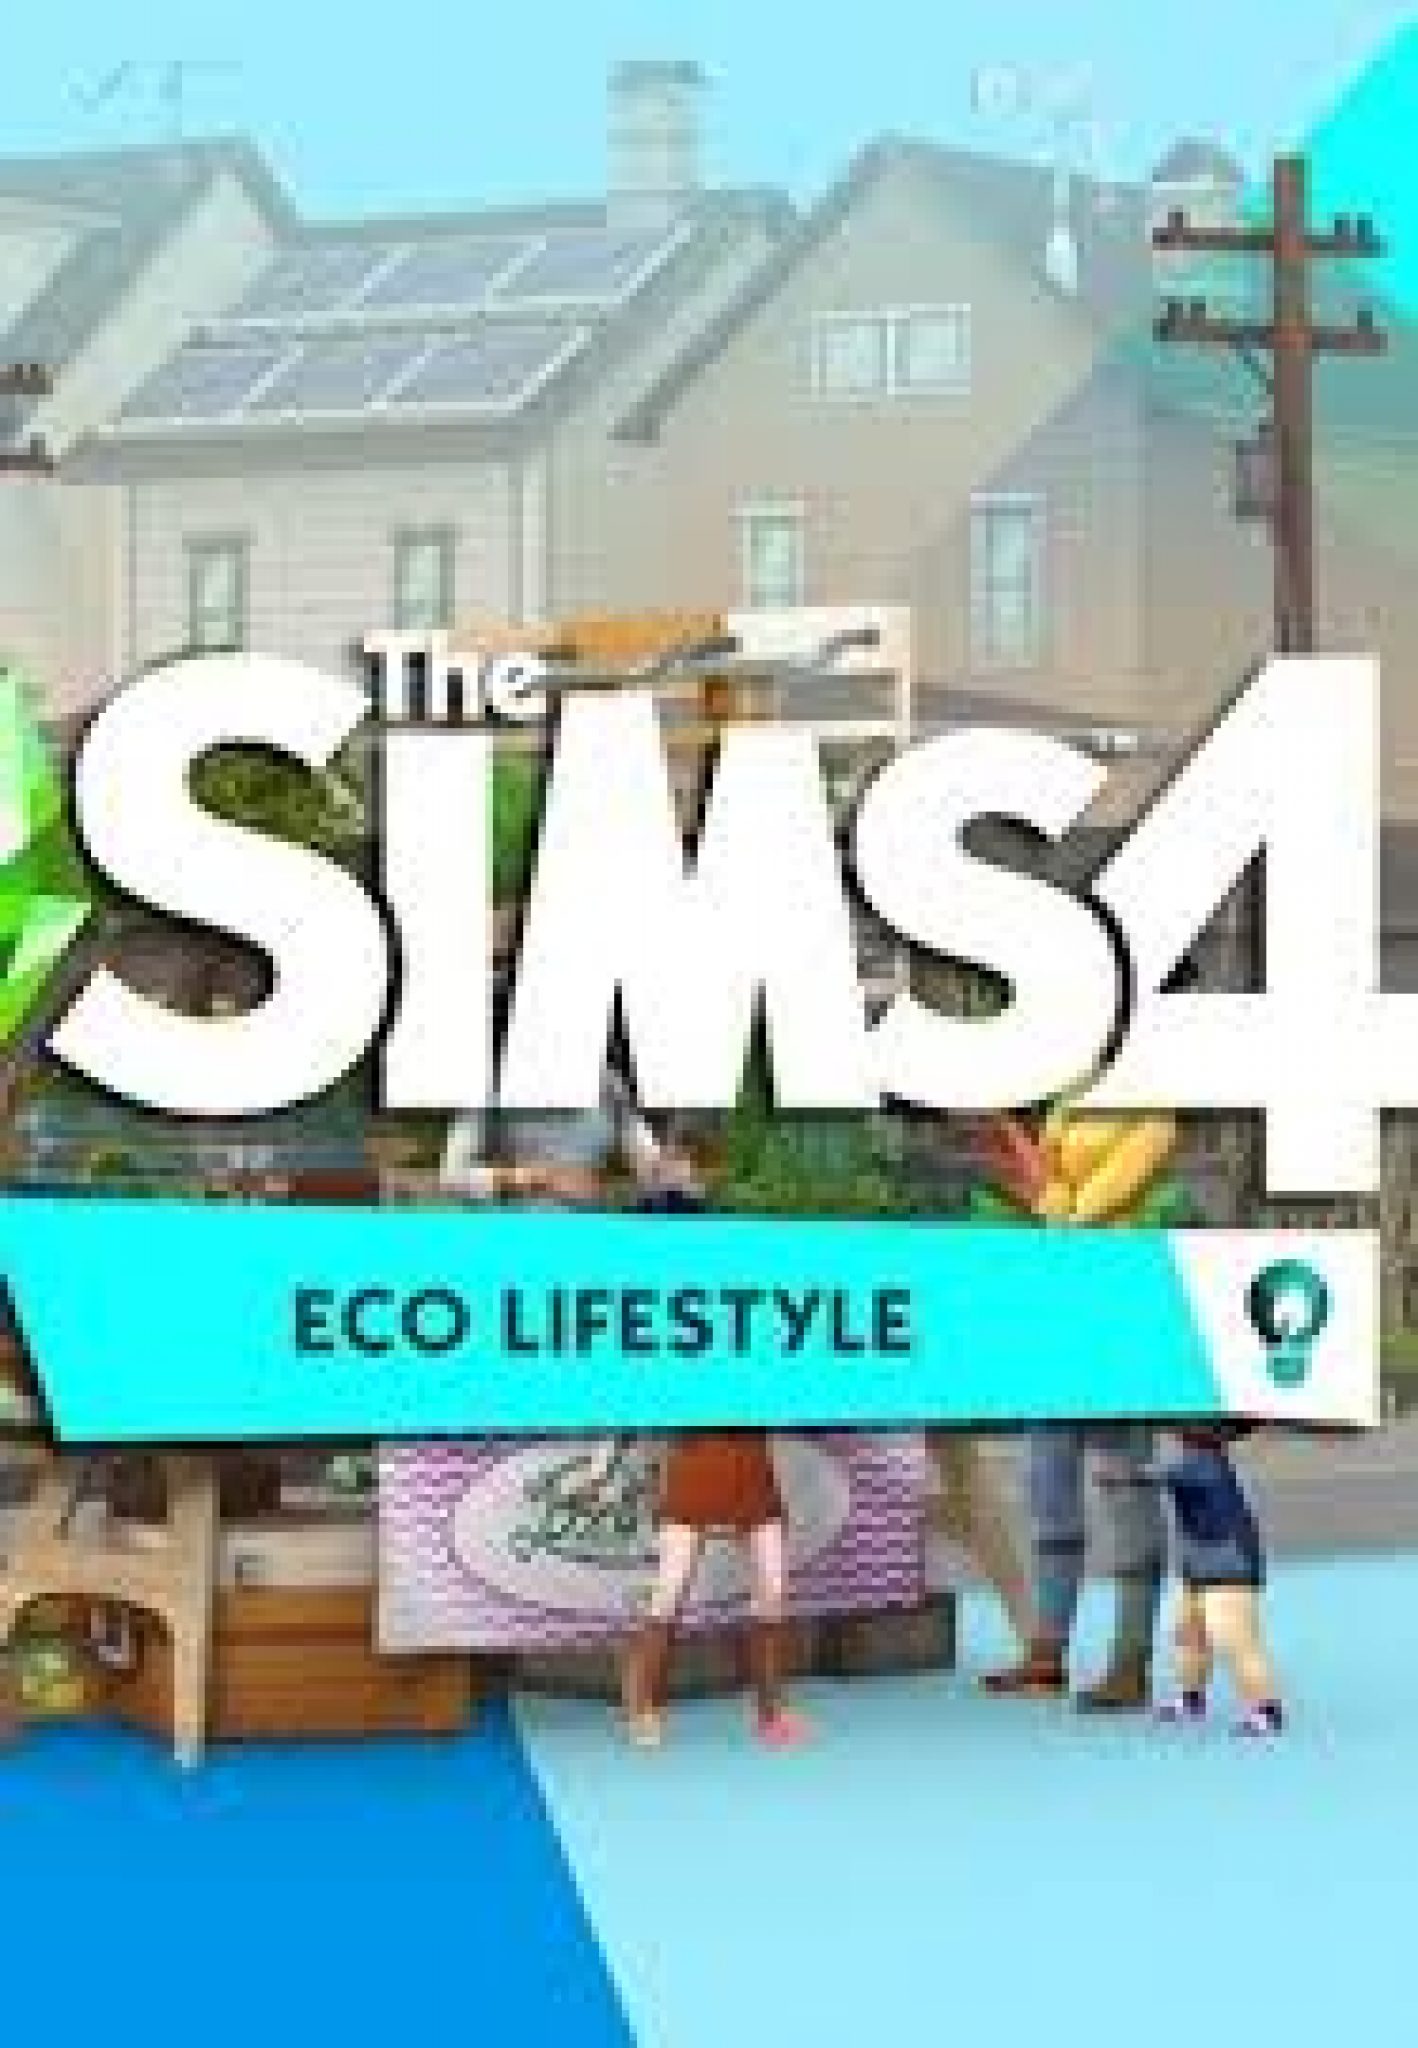 free of sims 4